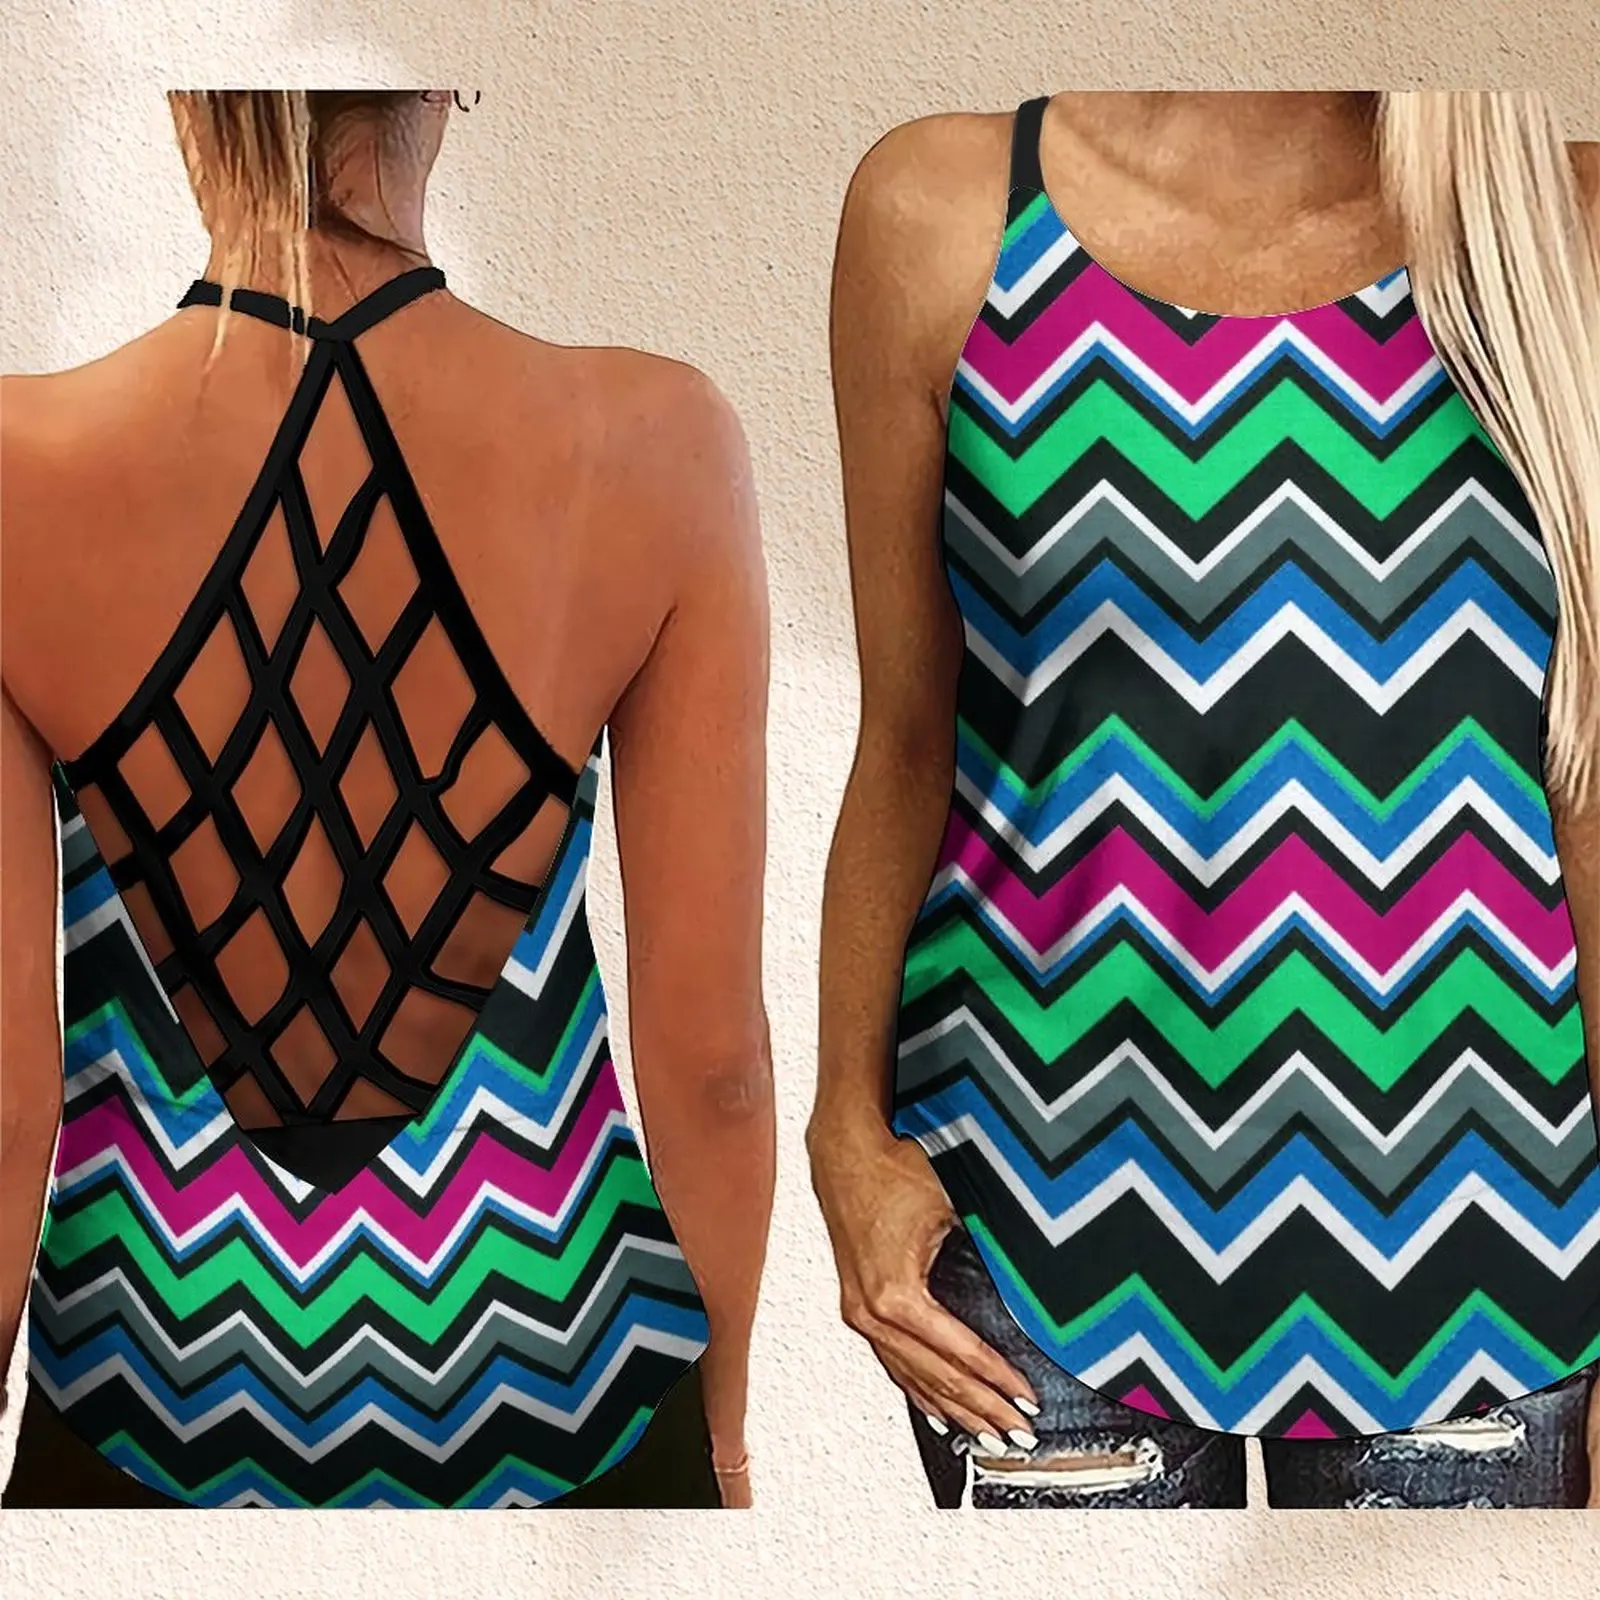 

Women's Fashion Backless Sleeveless Hollow Out Lines Rainbow Colorful Print Criss Cross Tank Top Y2k Top XS-8XL